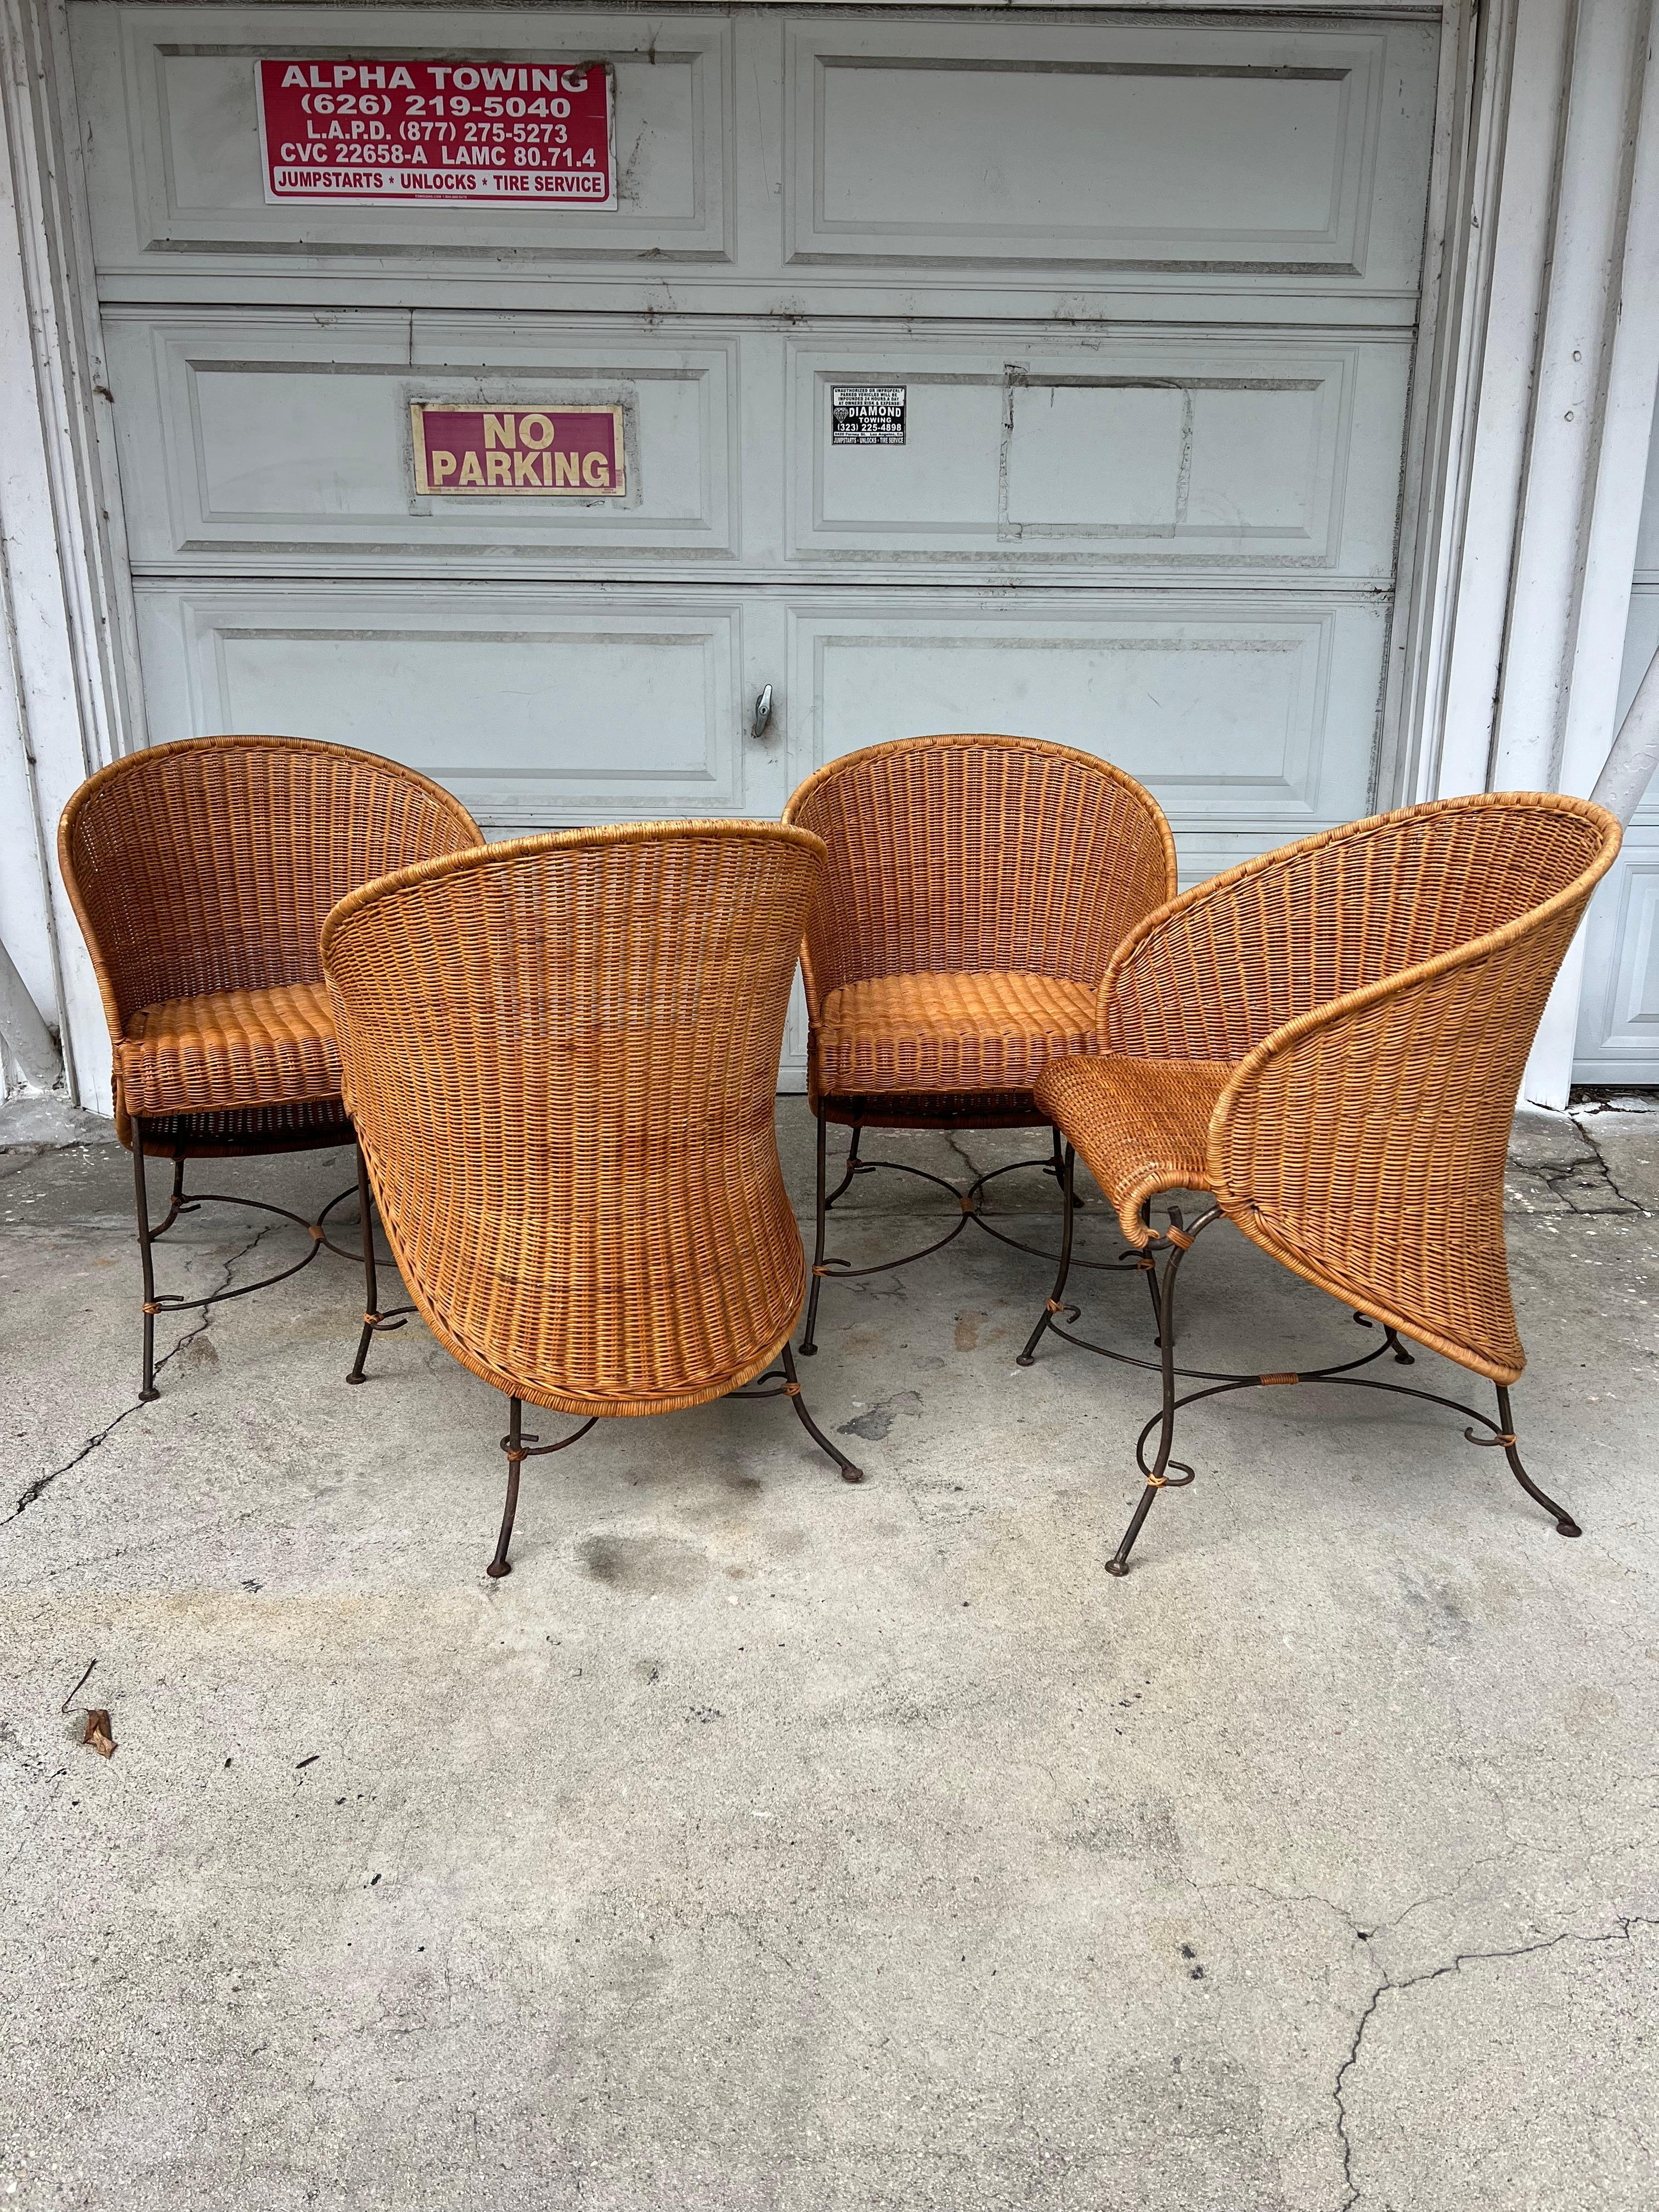 Set of four rare wicker and wrought iron dining or patio chairs. The curves on these- magnificent from every angle. A cinched waste silhouette from behind. Sturdy wrought iron frames with small wicker tie details at base. Woven wicker backs and